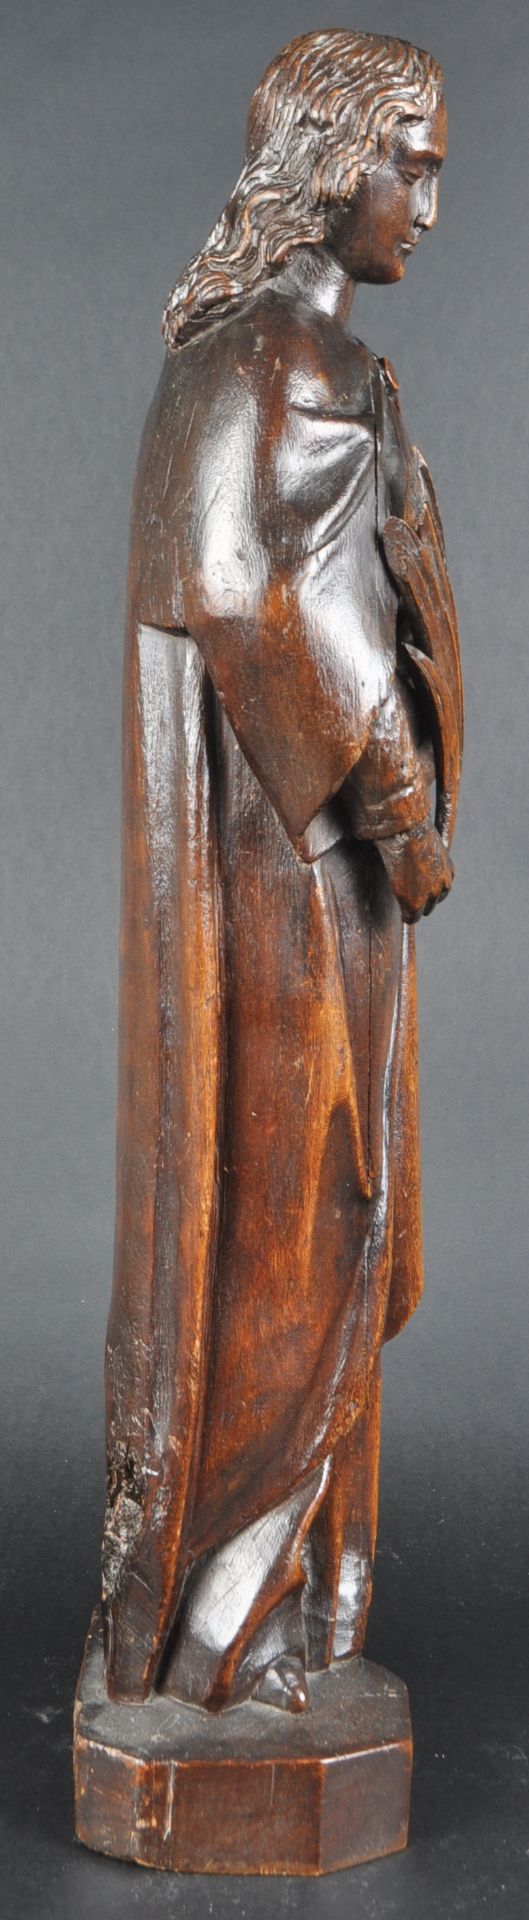 19TH CENTURY MAHOGANY CARVED STATUE OF A SAINT - Image 6 of 6